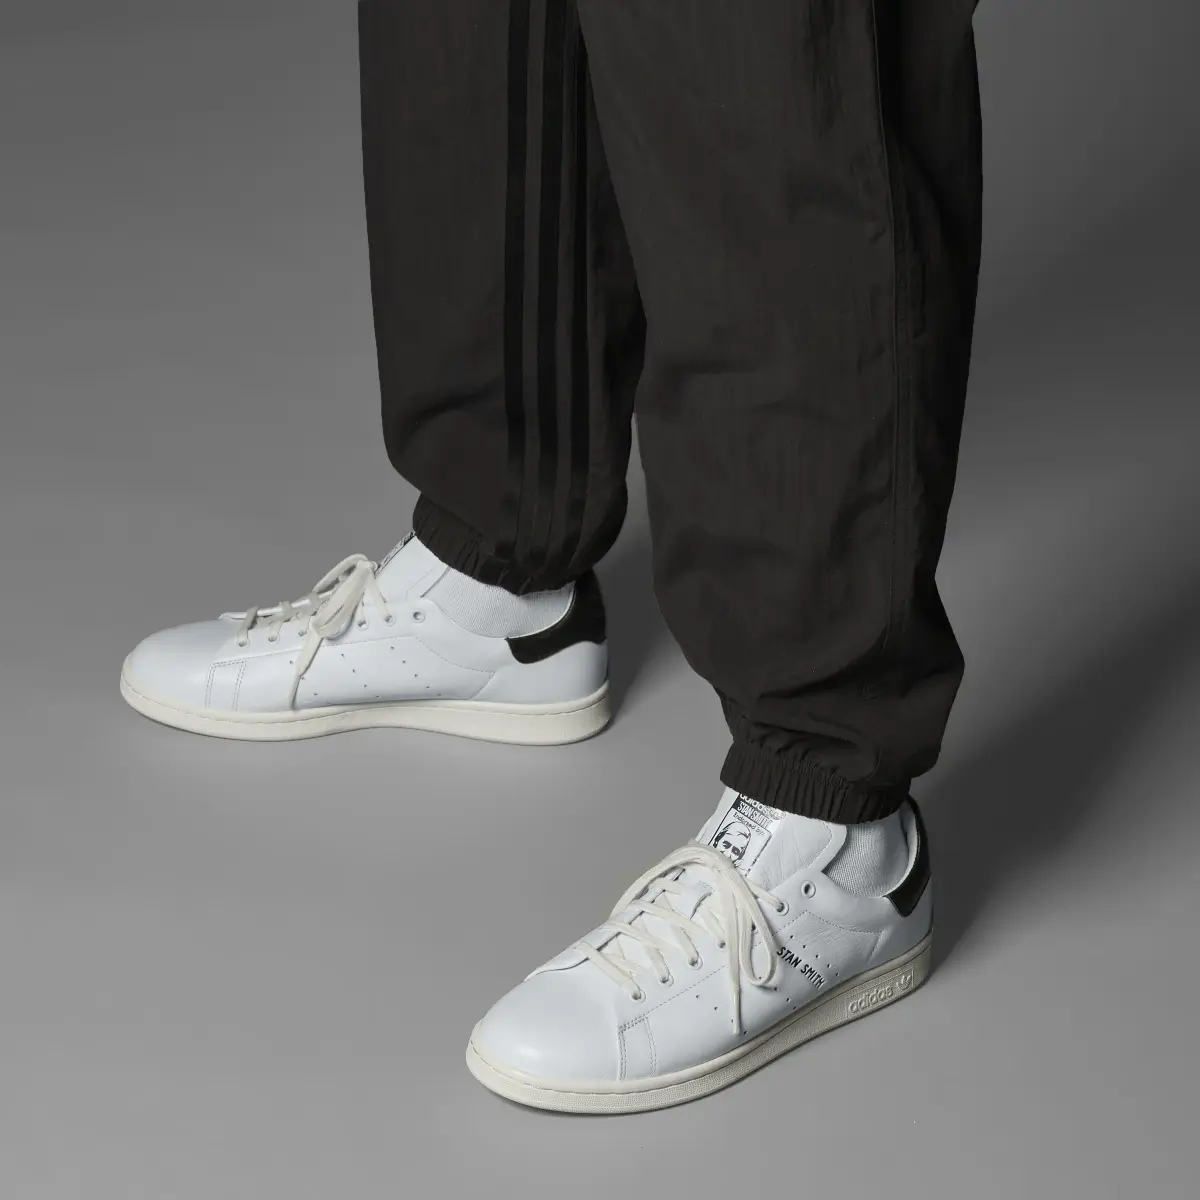 Adidas Chaussure Stan Smith Lux. 2